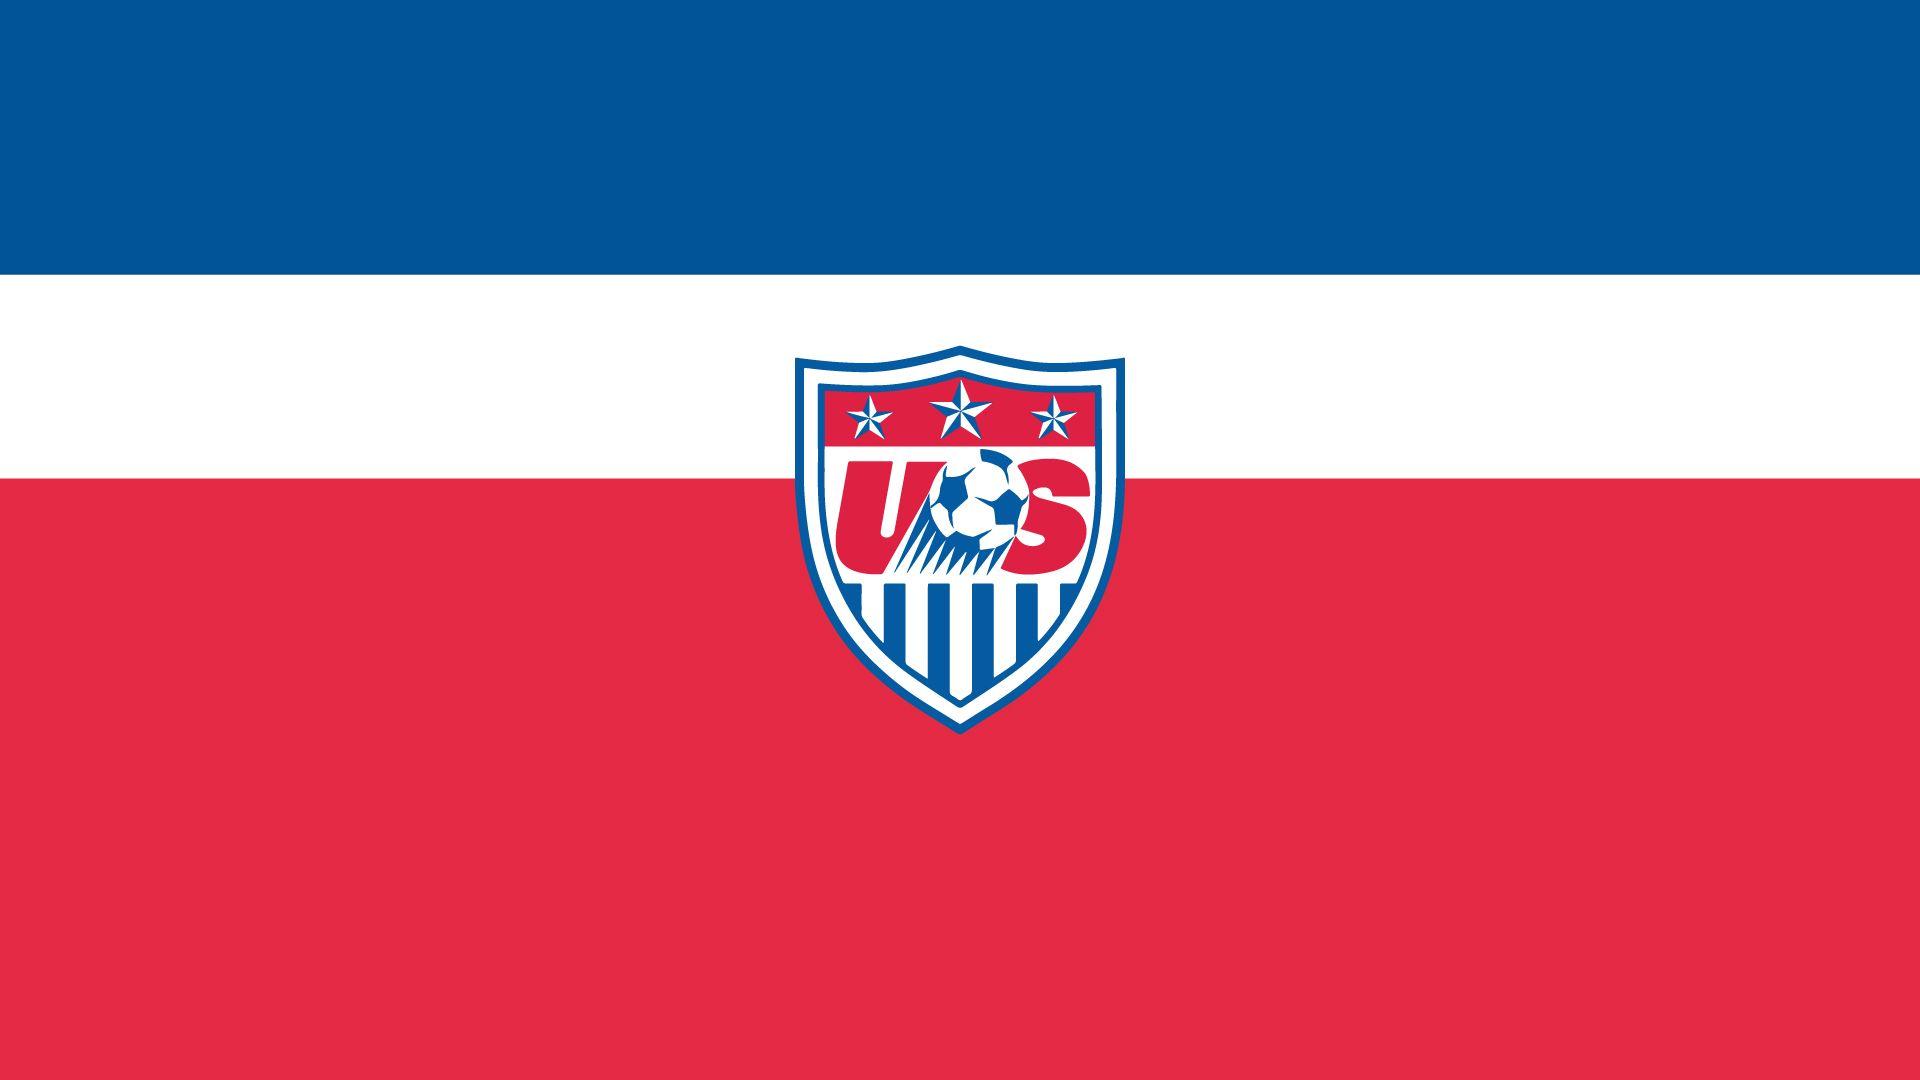 USA Nation Soccer Team Wallpaper and Background Image